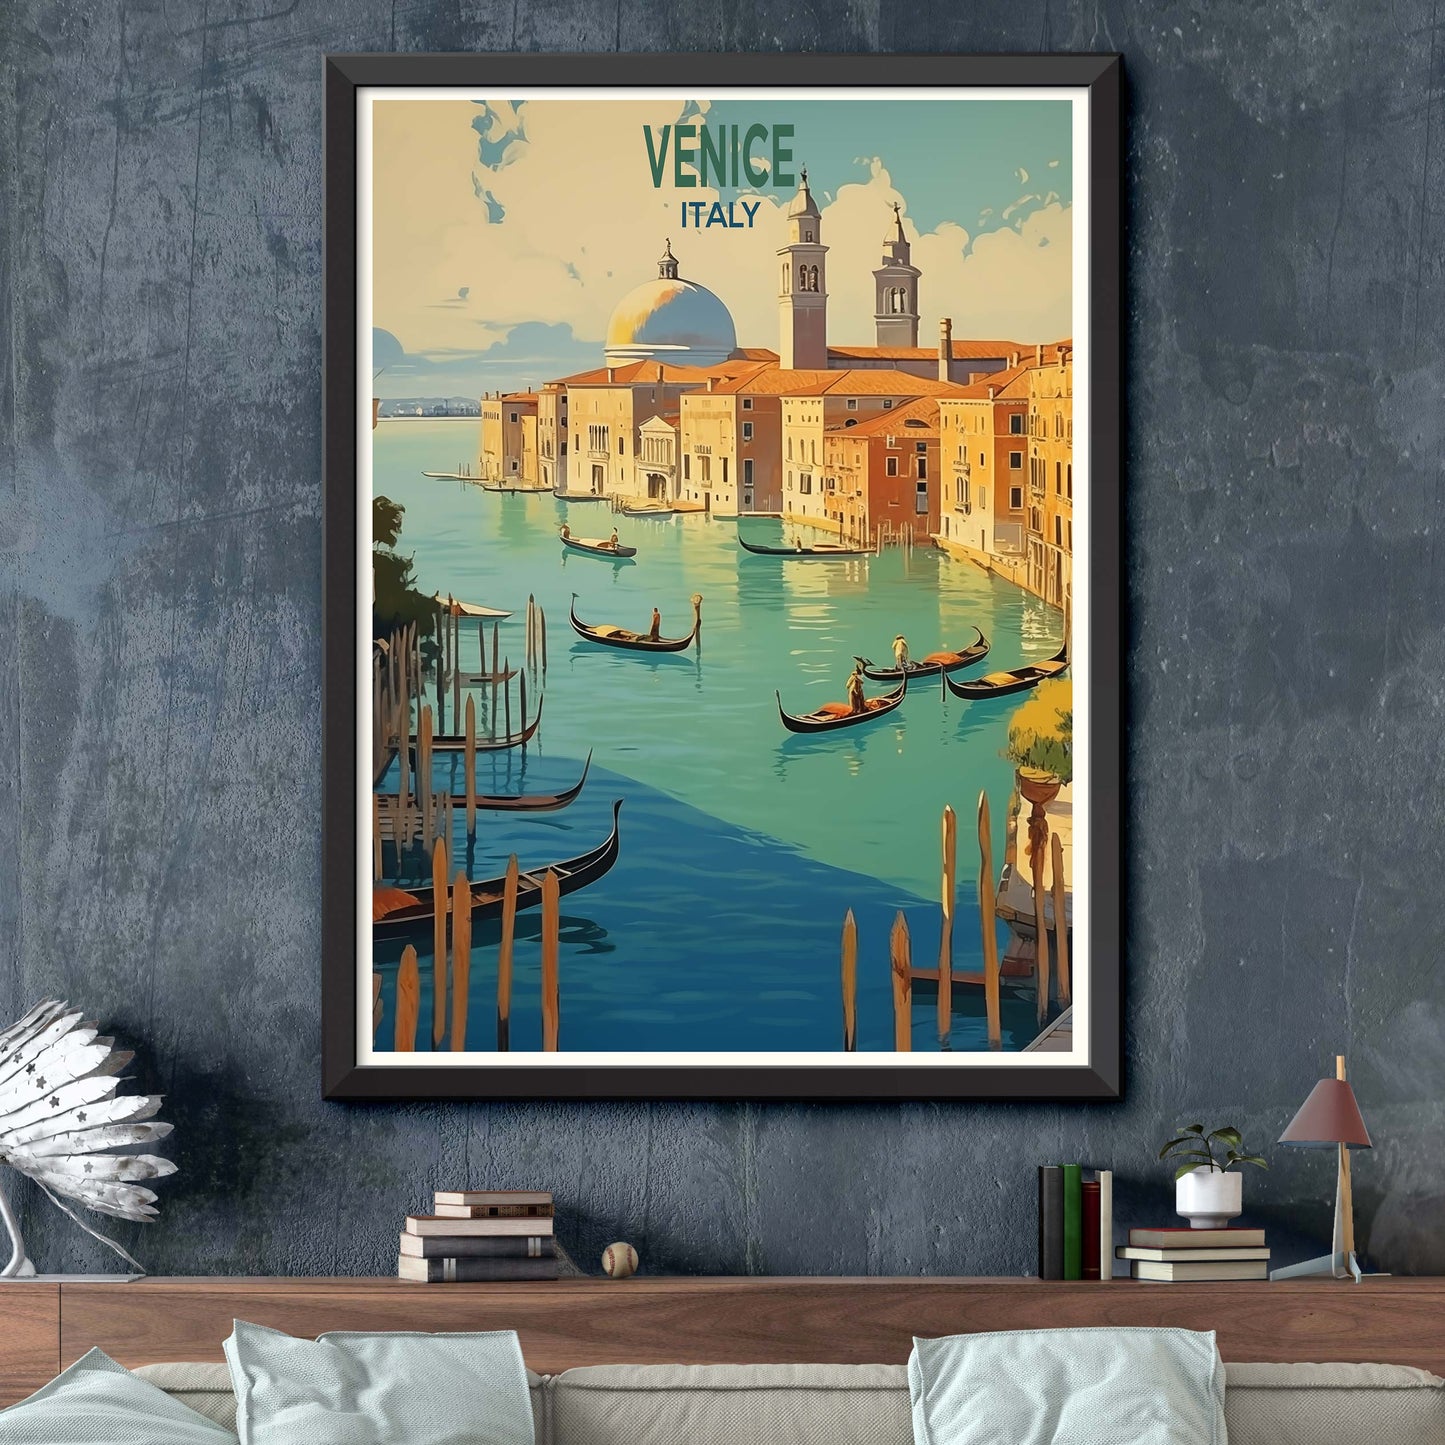 Venice, Italy City of Canals and Romance